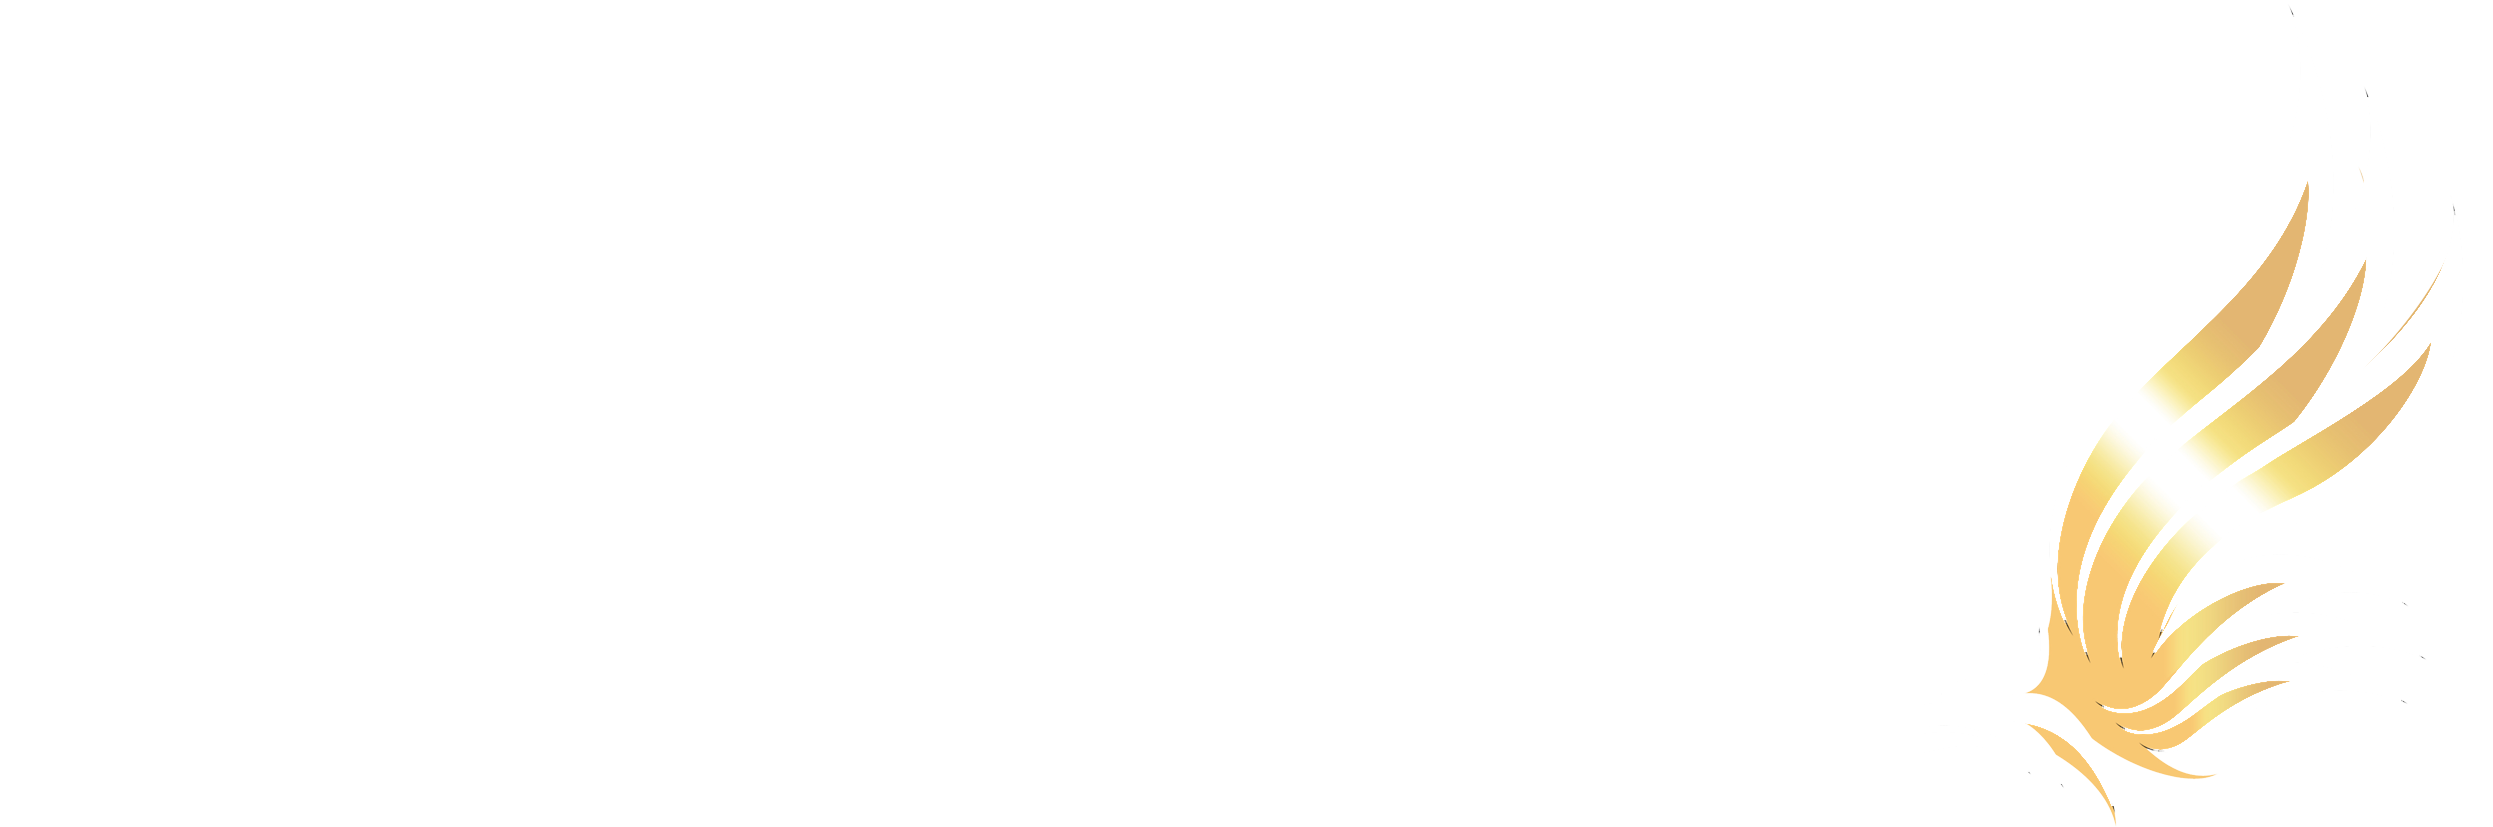 GULF FALCON BUSINESS SOLUTIONS